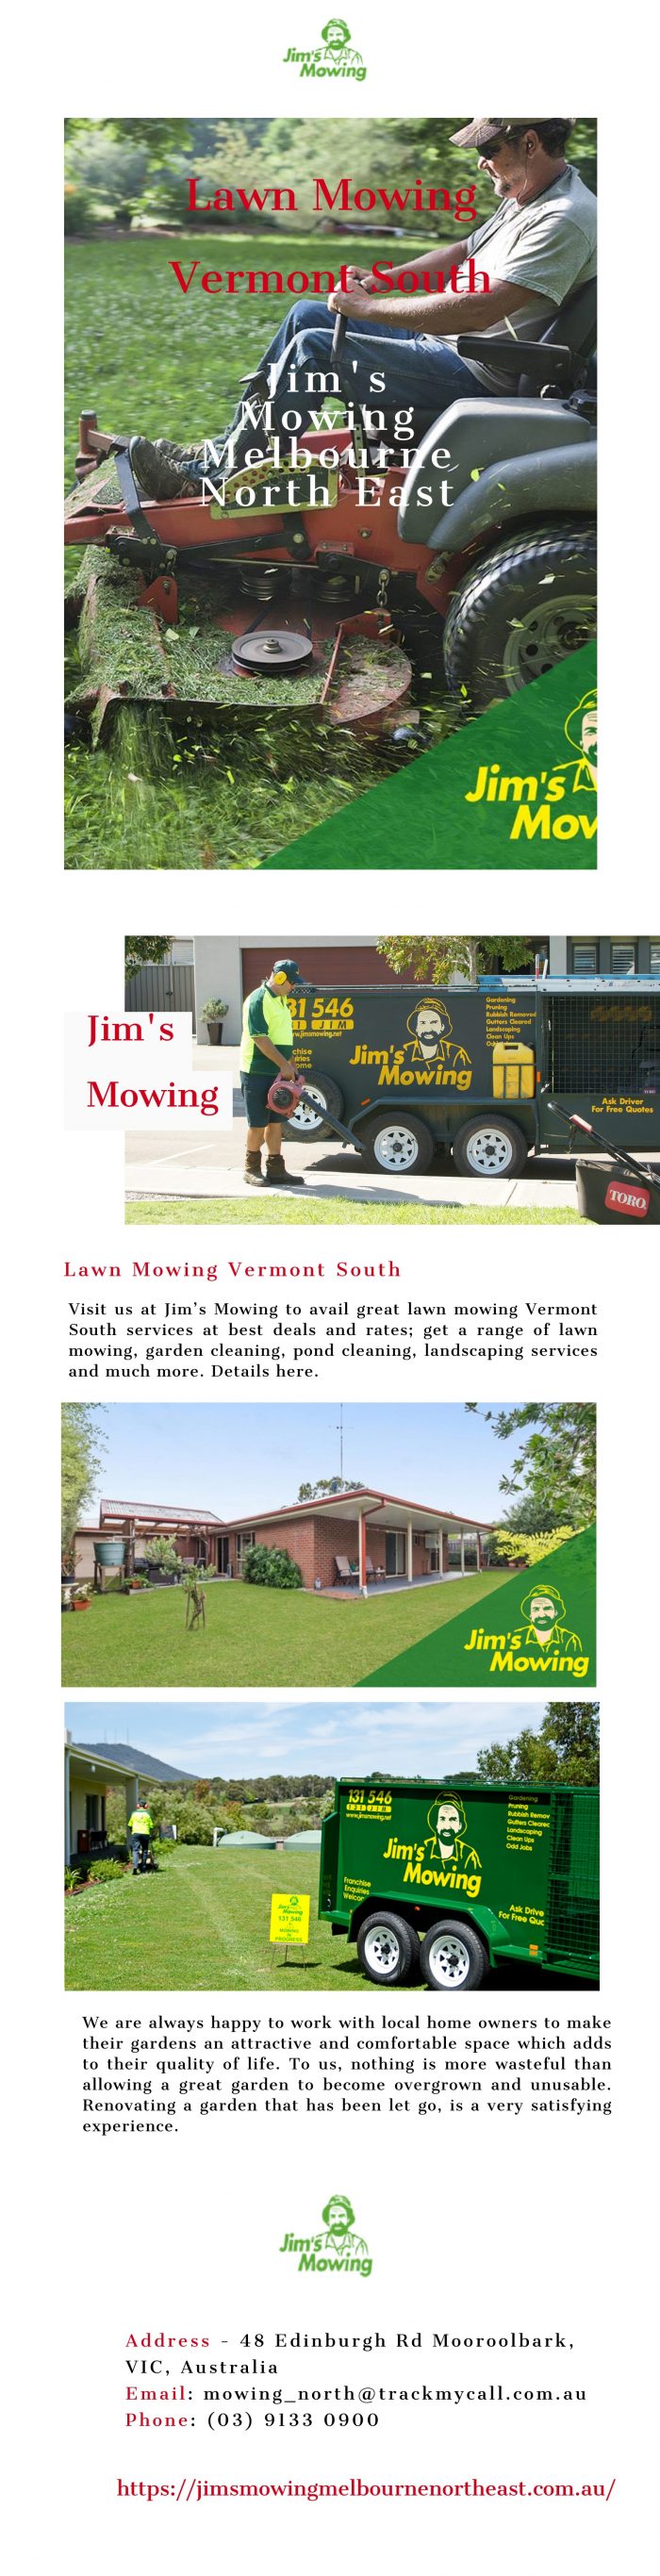 Looking for Lawn Mowing Vermont South at Best Deals | Jim’s Mowing Melbourne North East